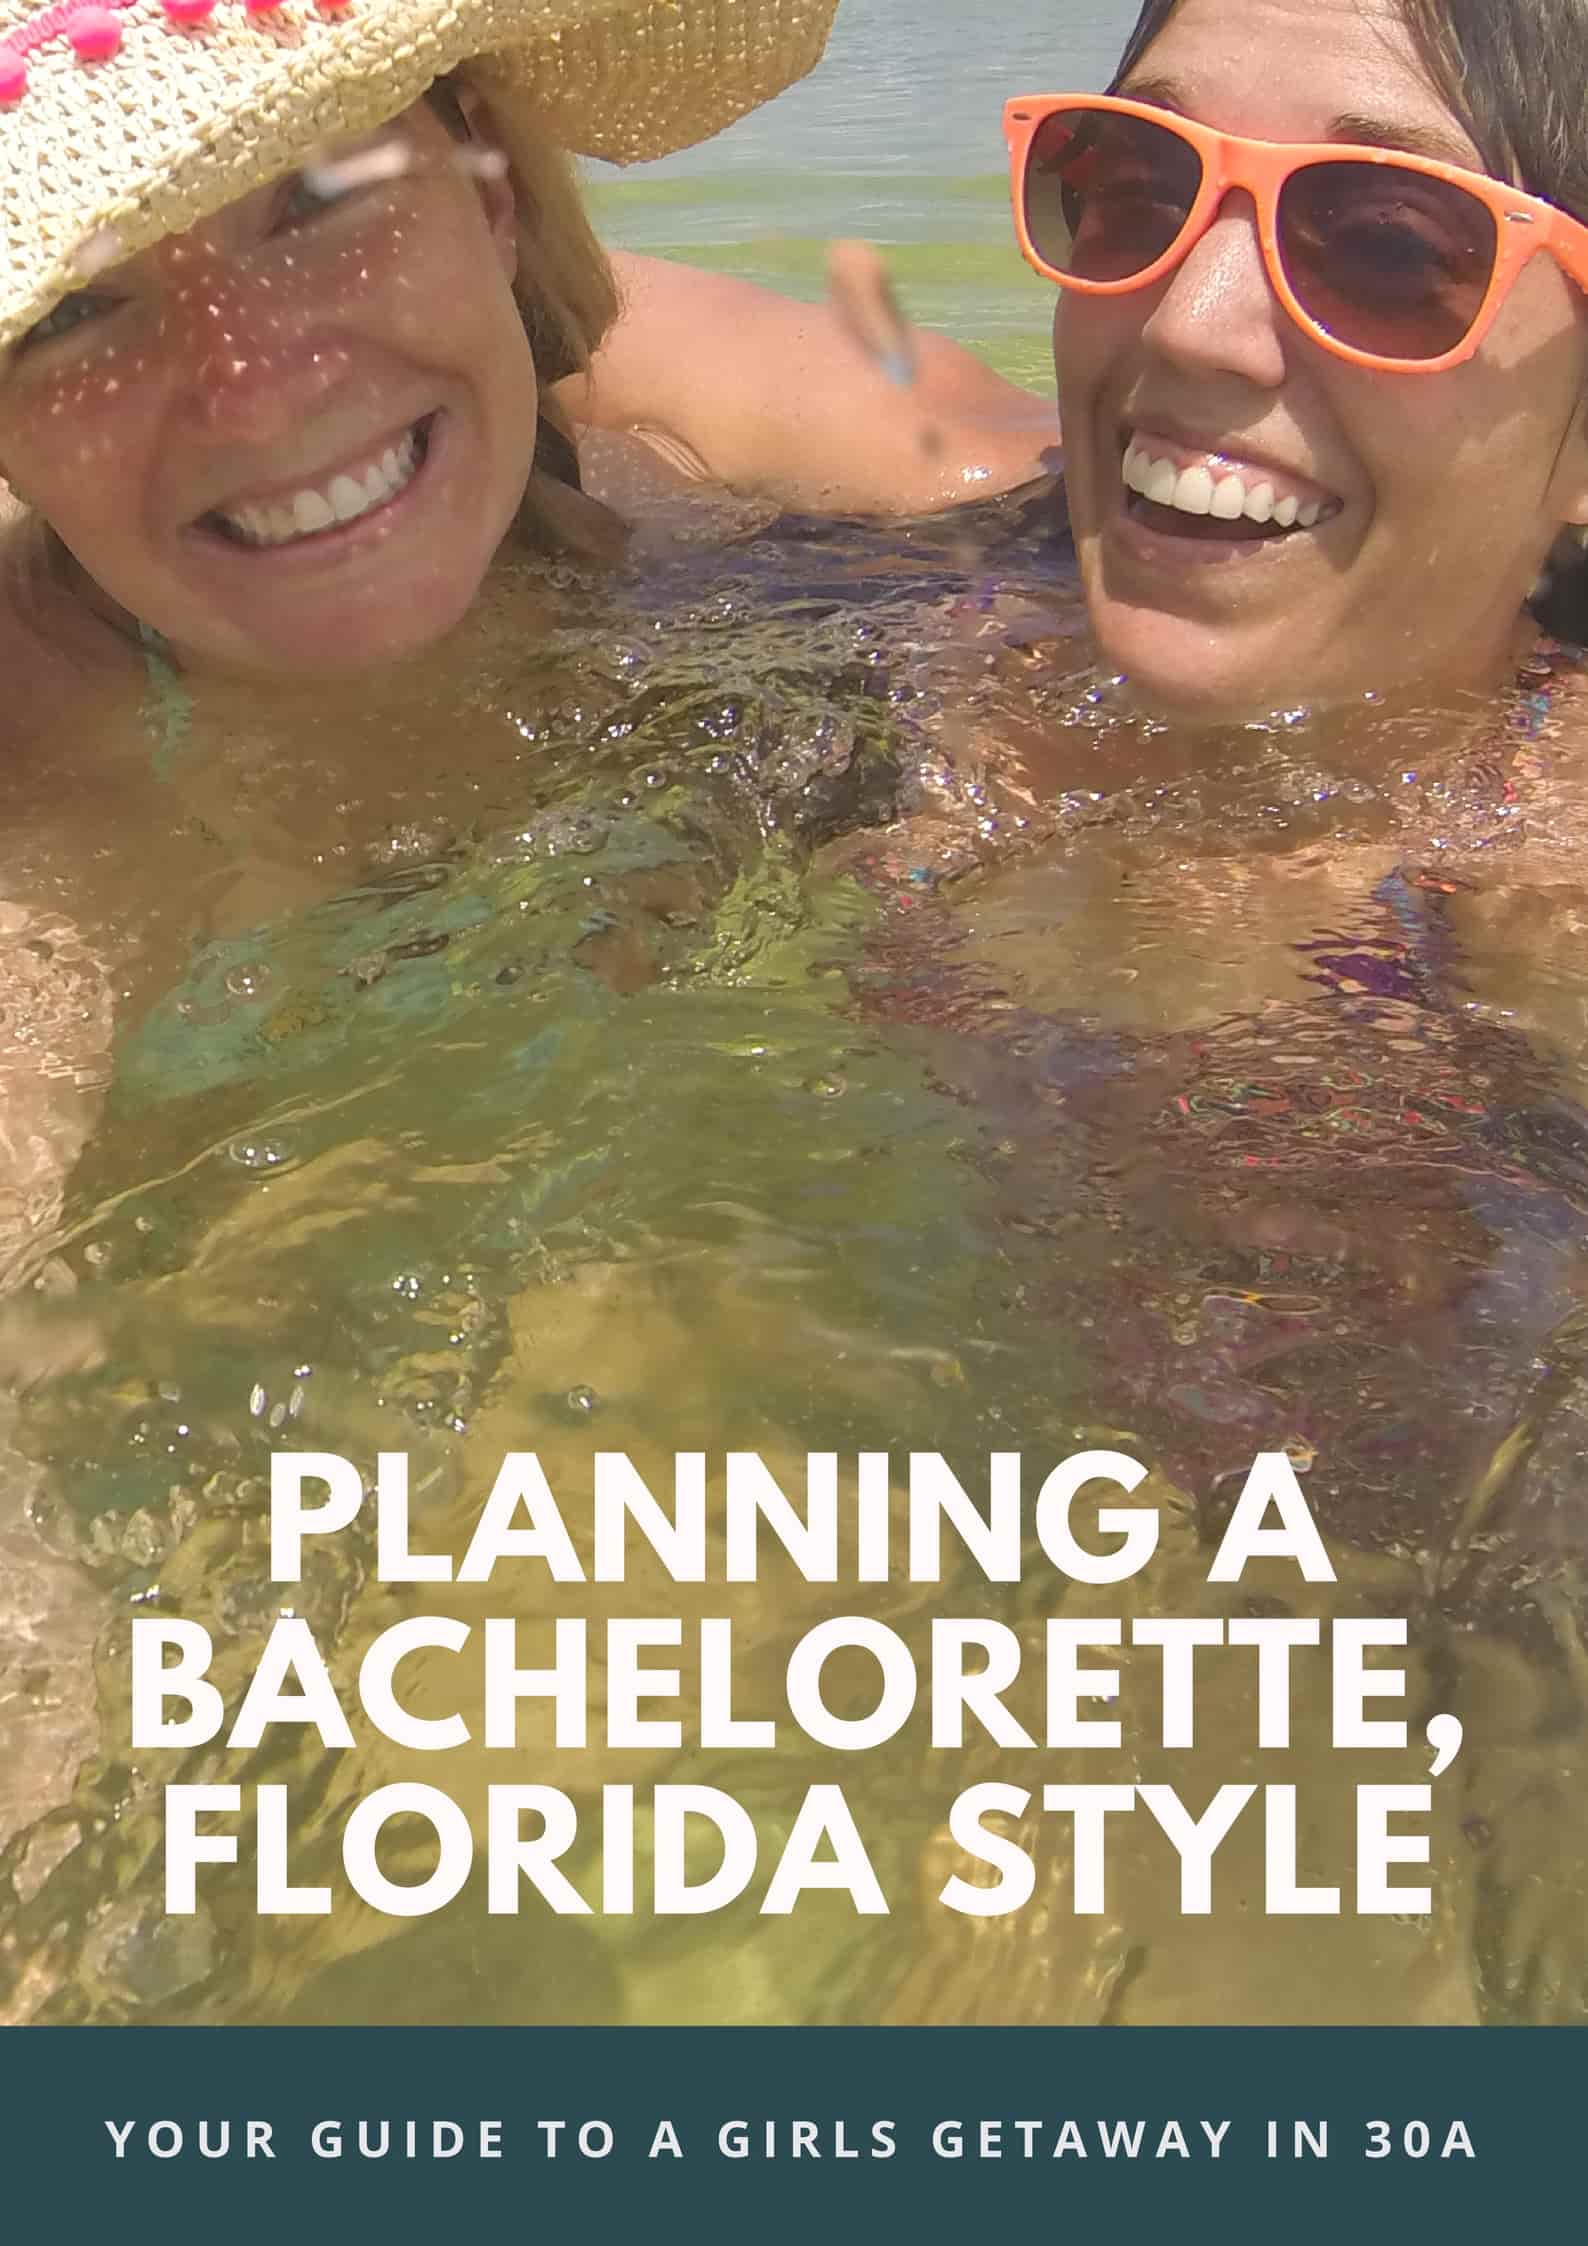 Planning a Bachelorette Weekend in Florida, PCB Style